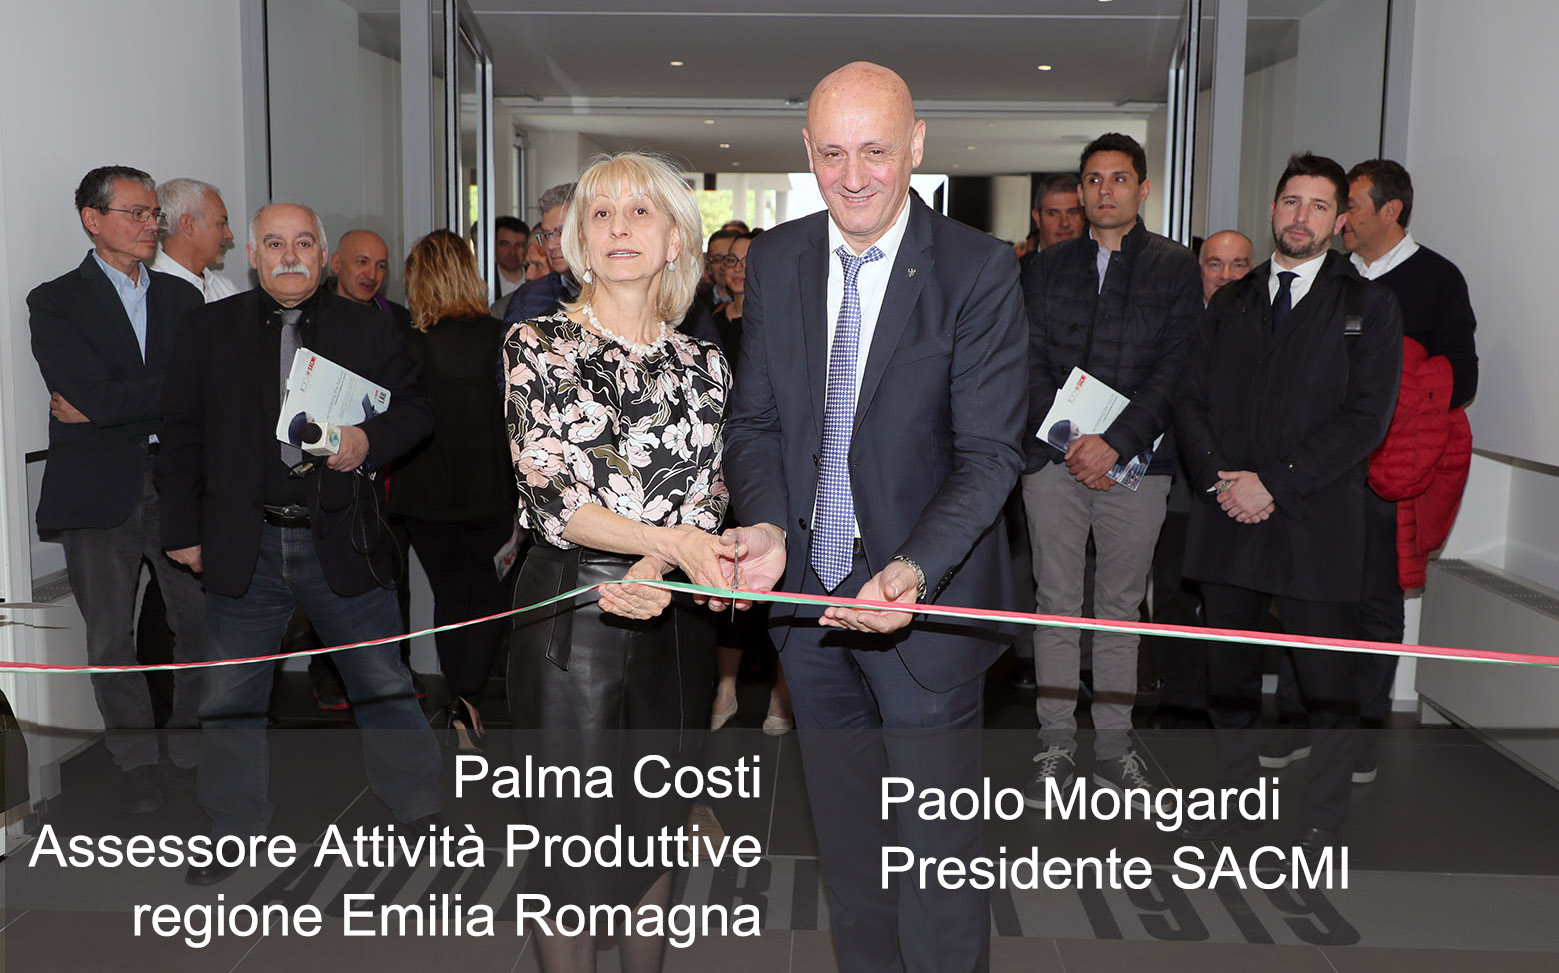 SACMI opens its centenary celebrations with the inauguration of the new Innovation Lab